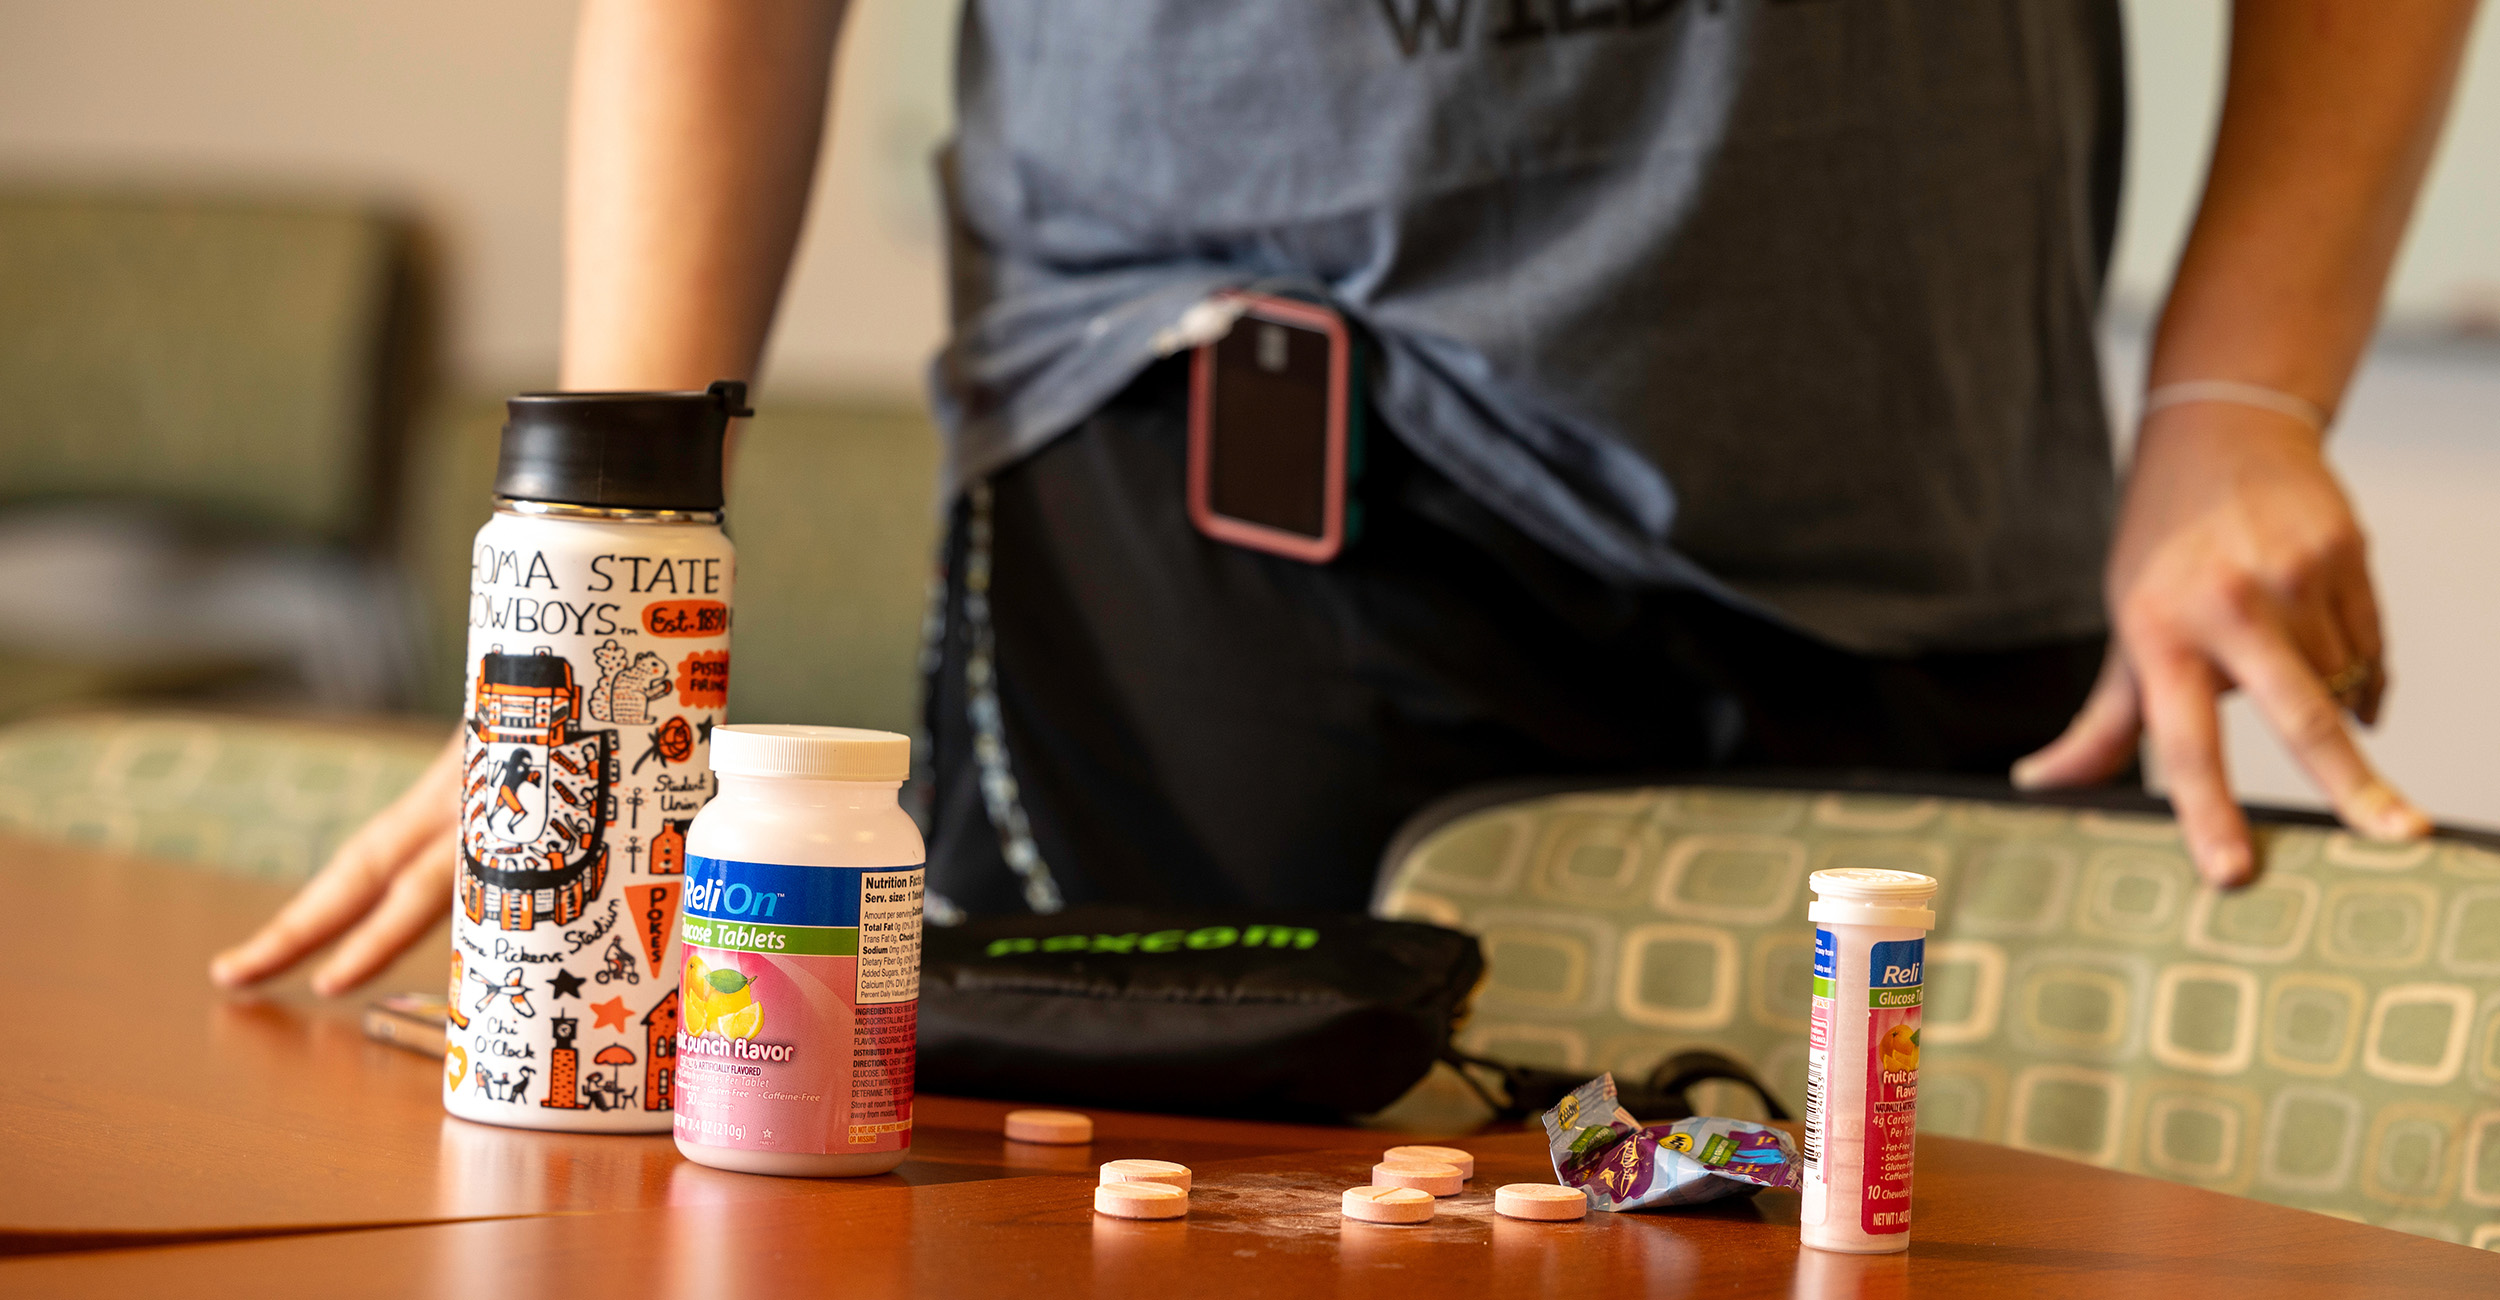 Before participating in outdoor activities in the summer heat, people with diabetes need to keep a few emergency supplies on hand, including fruit snacks, glucose tablets and a water bottle. (Photo by Mitchell Alcala, OSU Agriculture)